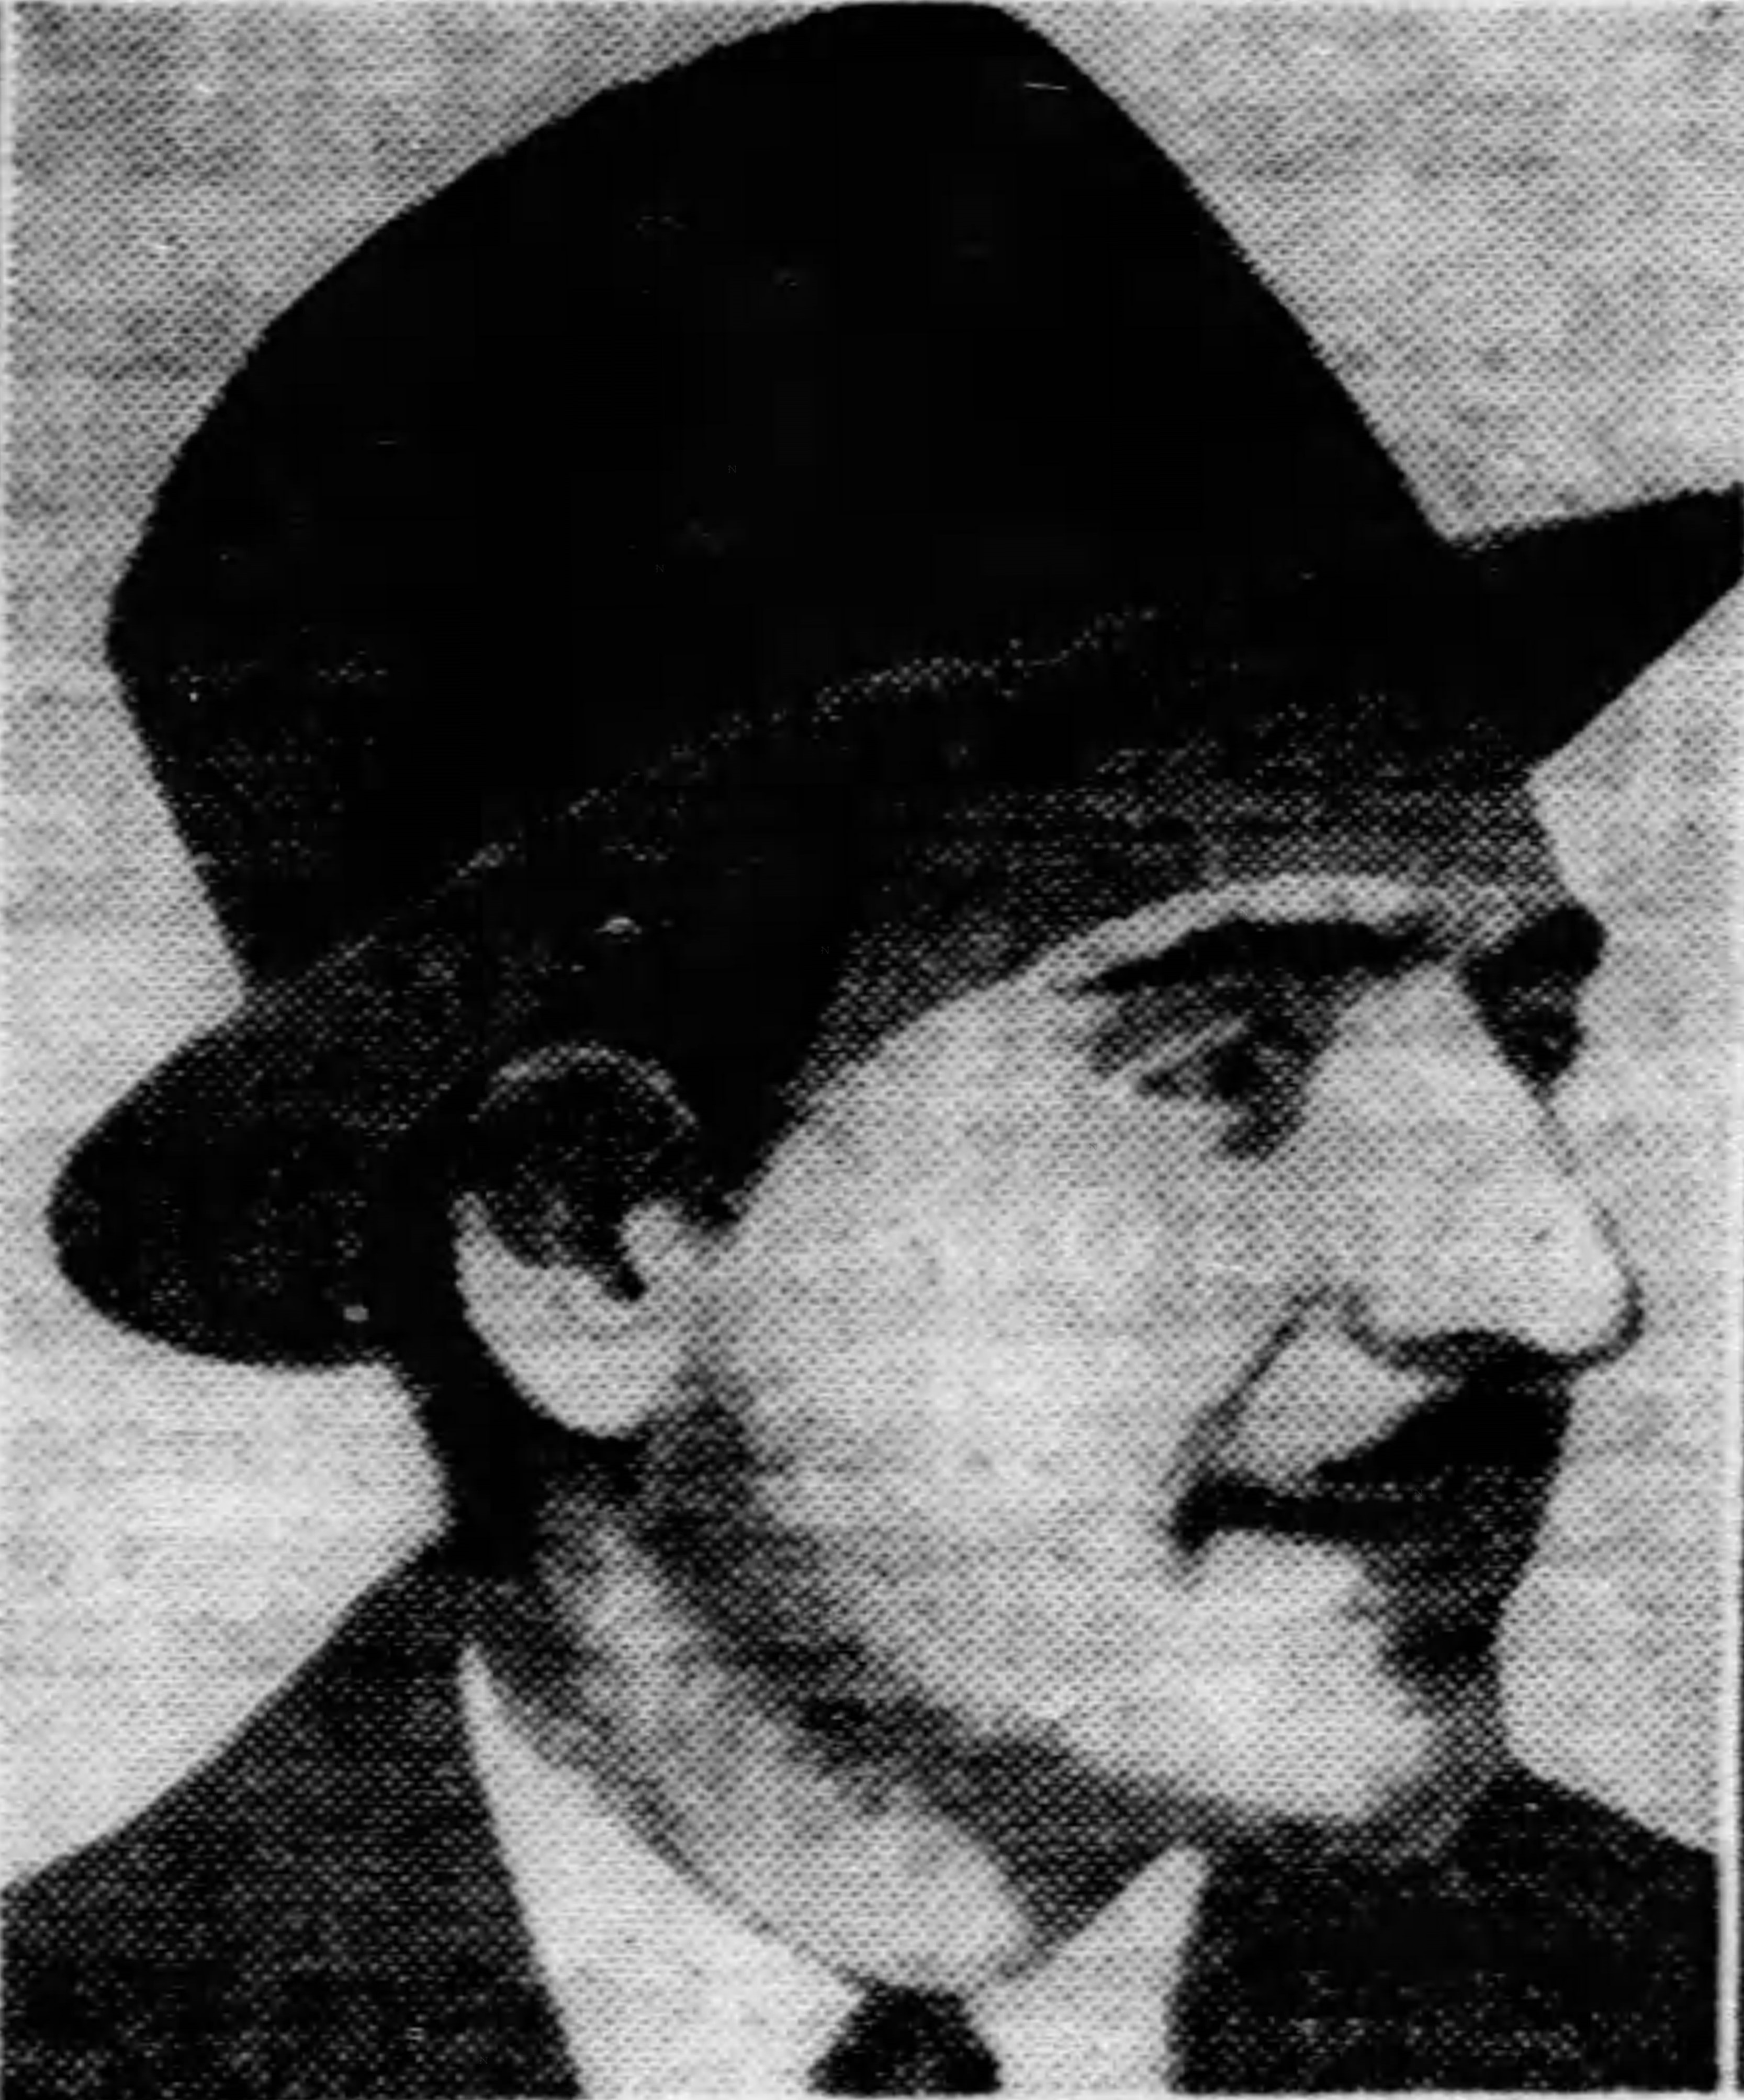 Three-quarter-view, head and shoulders photograph of Pete Panto. He has a friendly smile on his face and wears a white shirt, dark tie and suit jacket, and a wool felt fedora on his head.